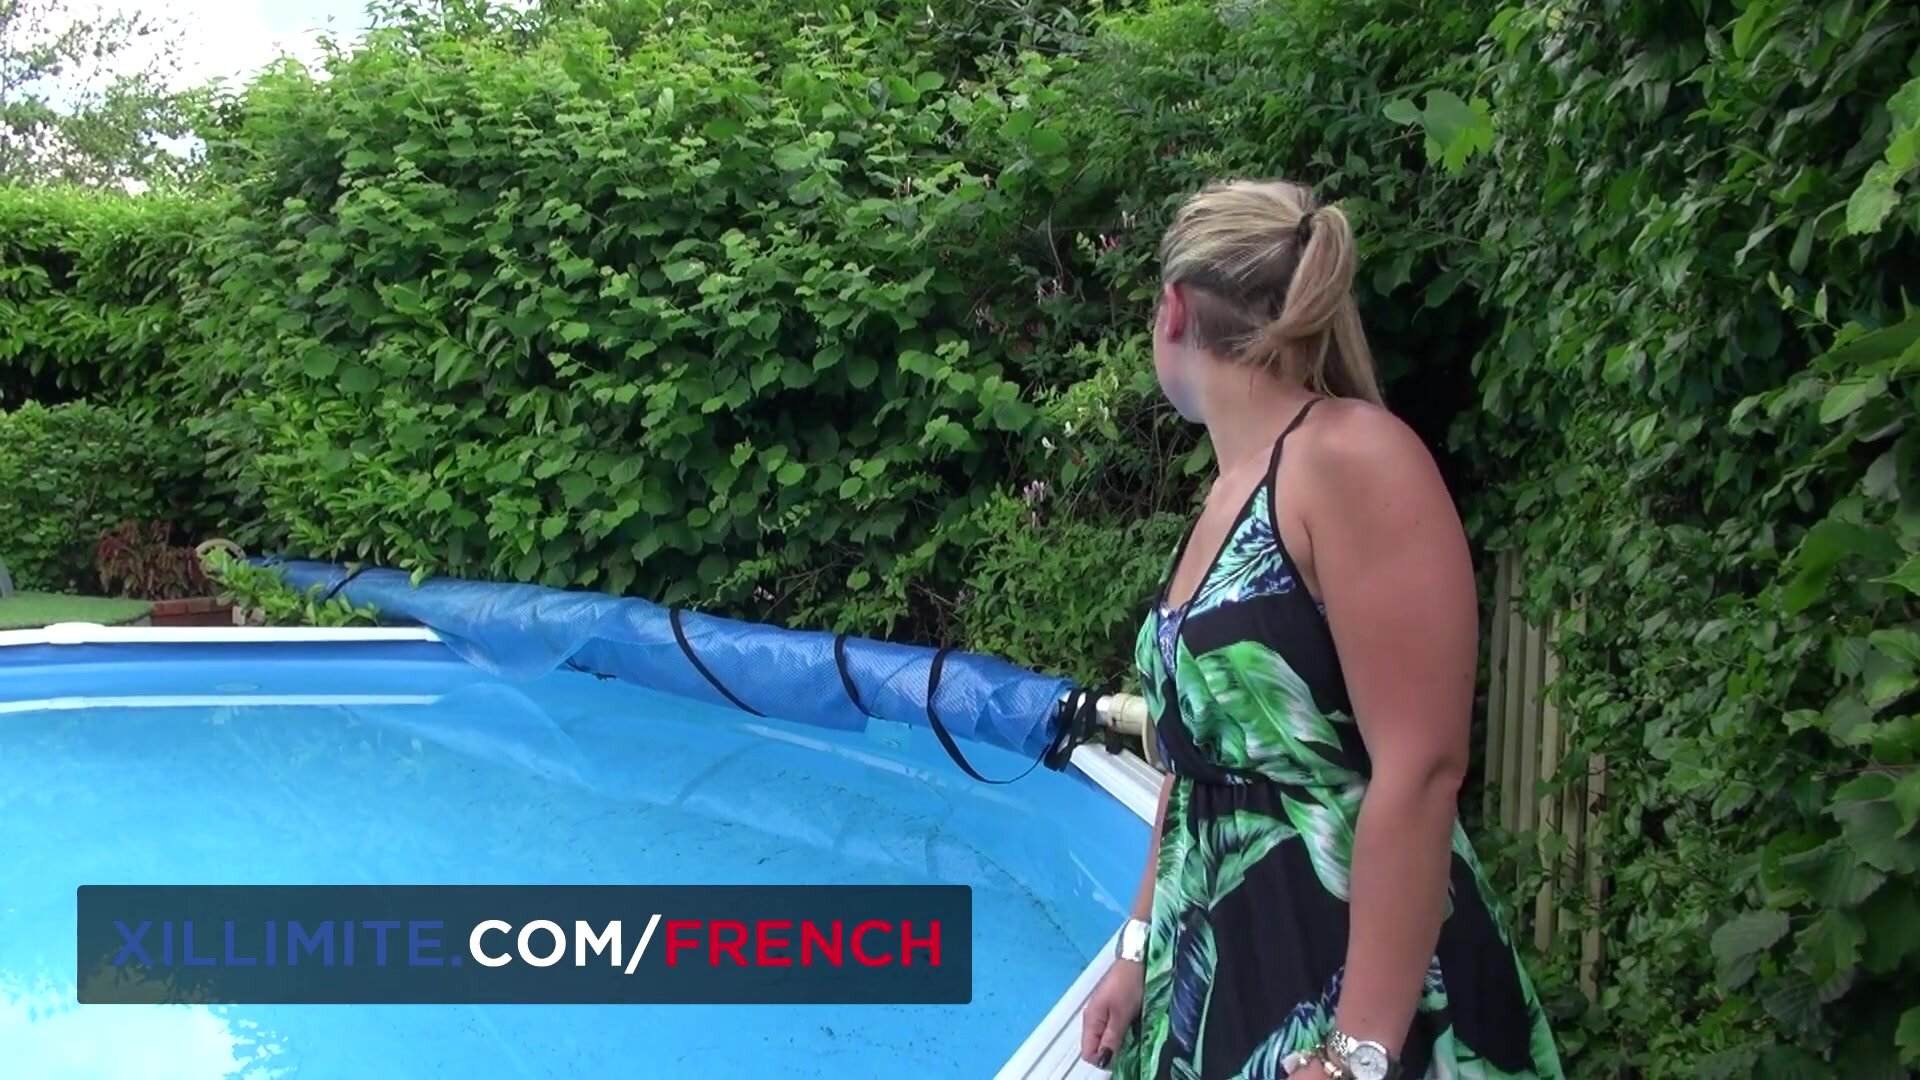 French Girls At Work - Anal sex around the pool